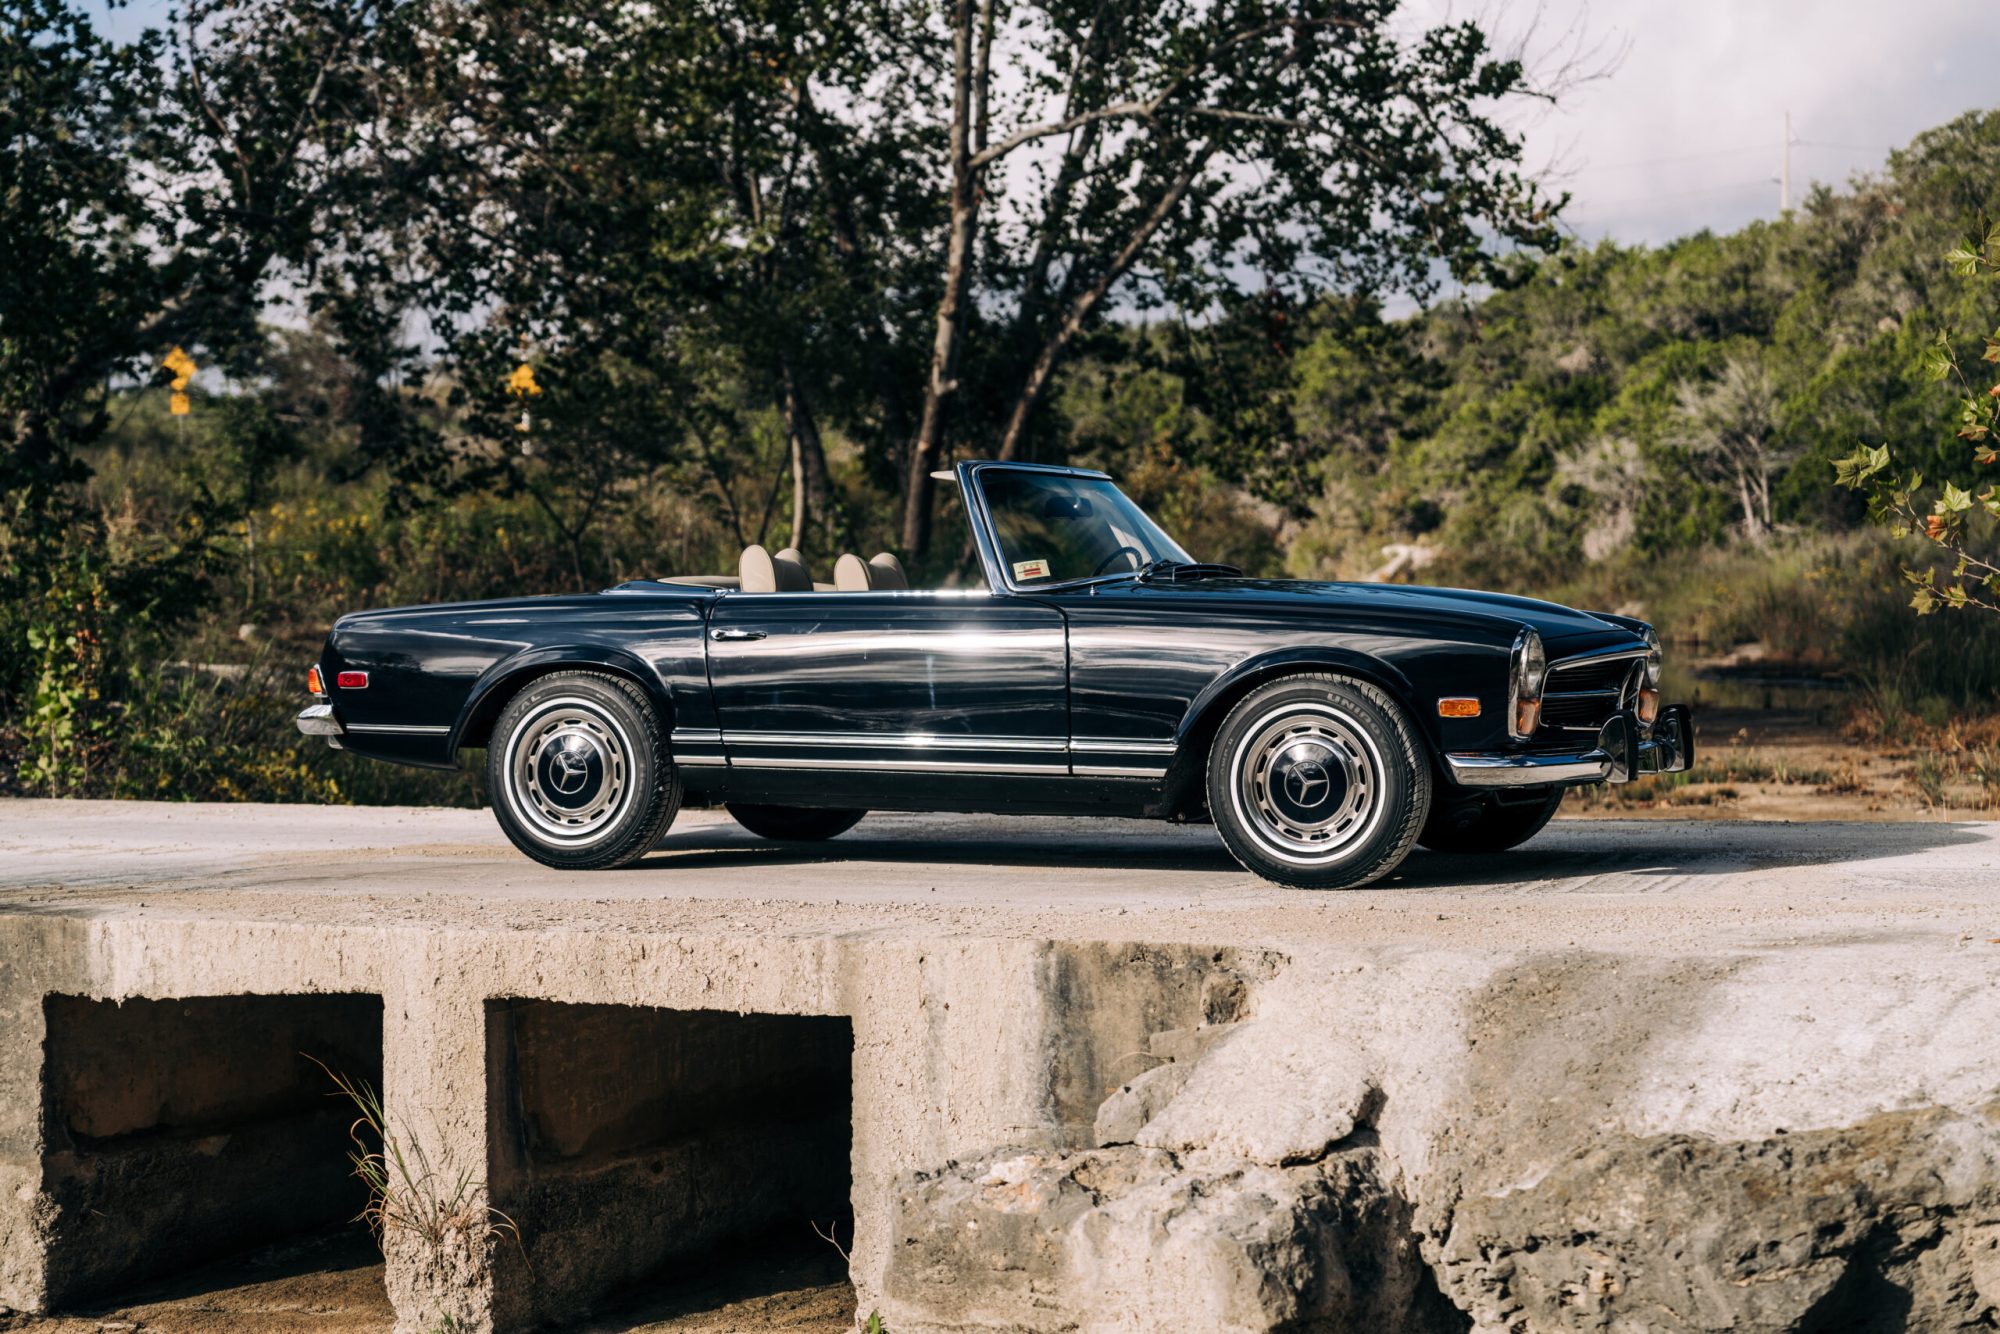 Moment Motor Company reimagines the Mercedes 280 SL Roadster with electric innovation